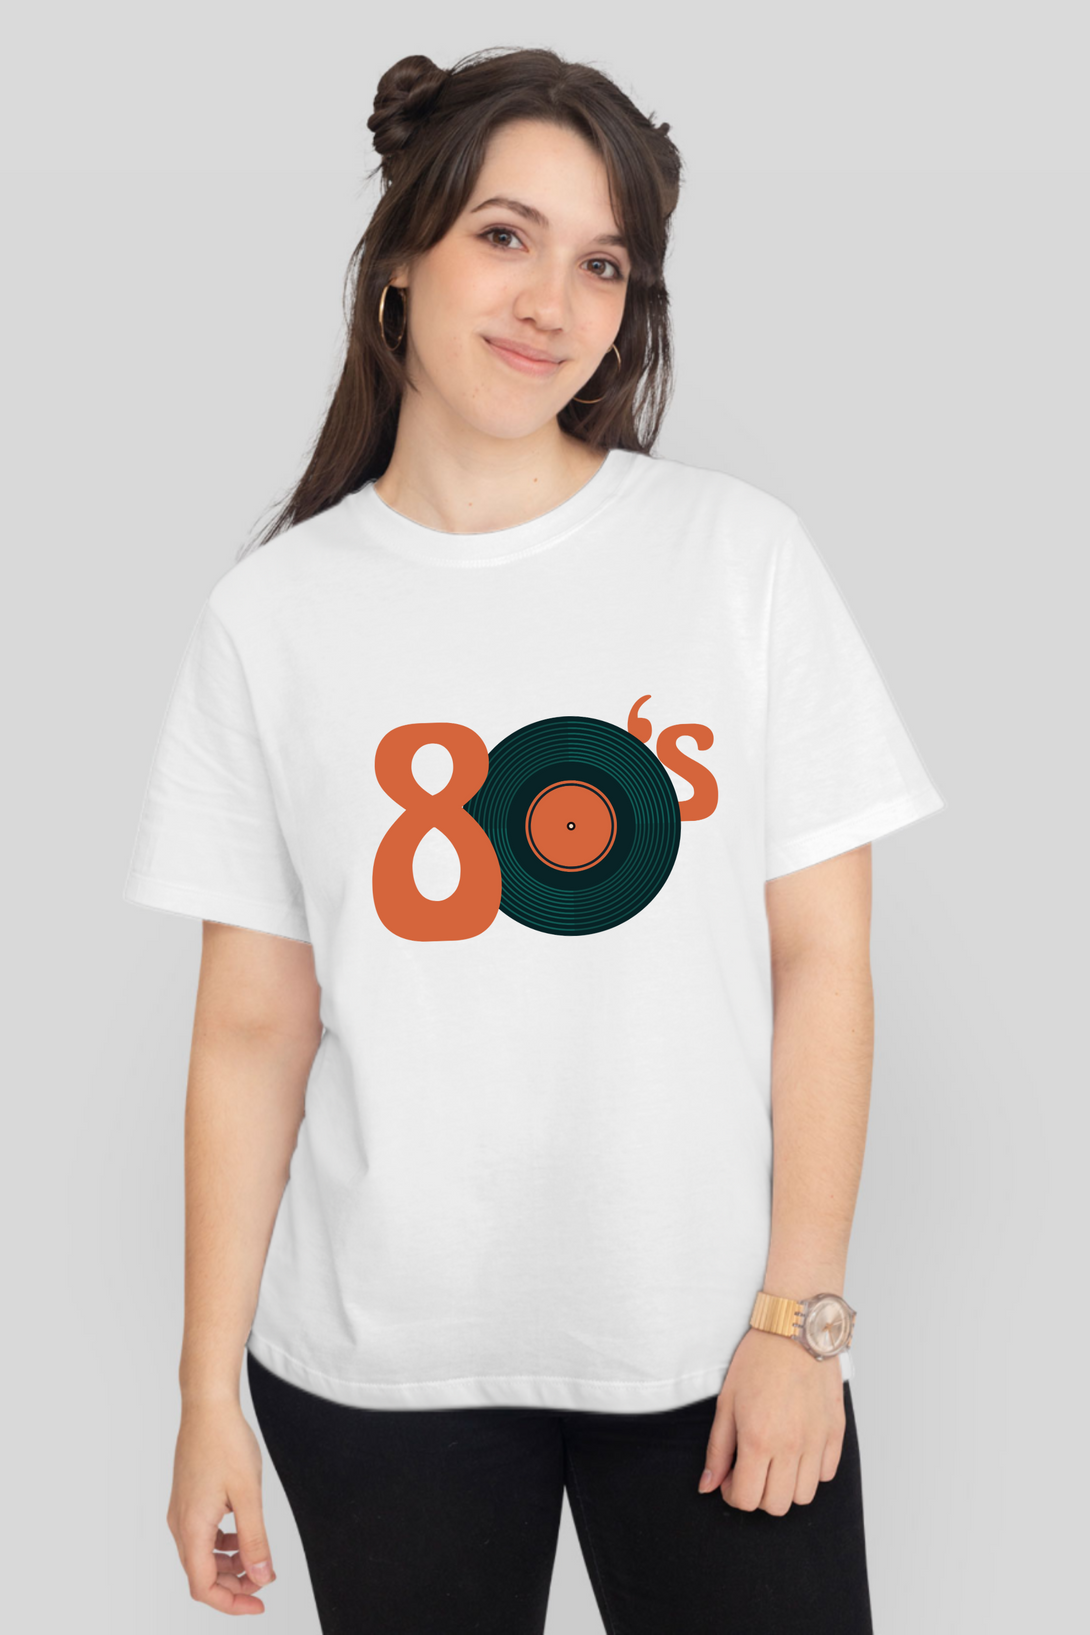 Retro Groove Printed T-Shirt For Women - WowWaves - 7